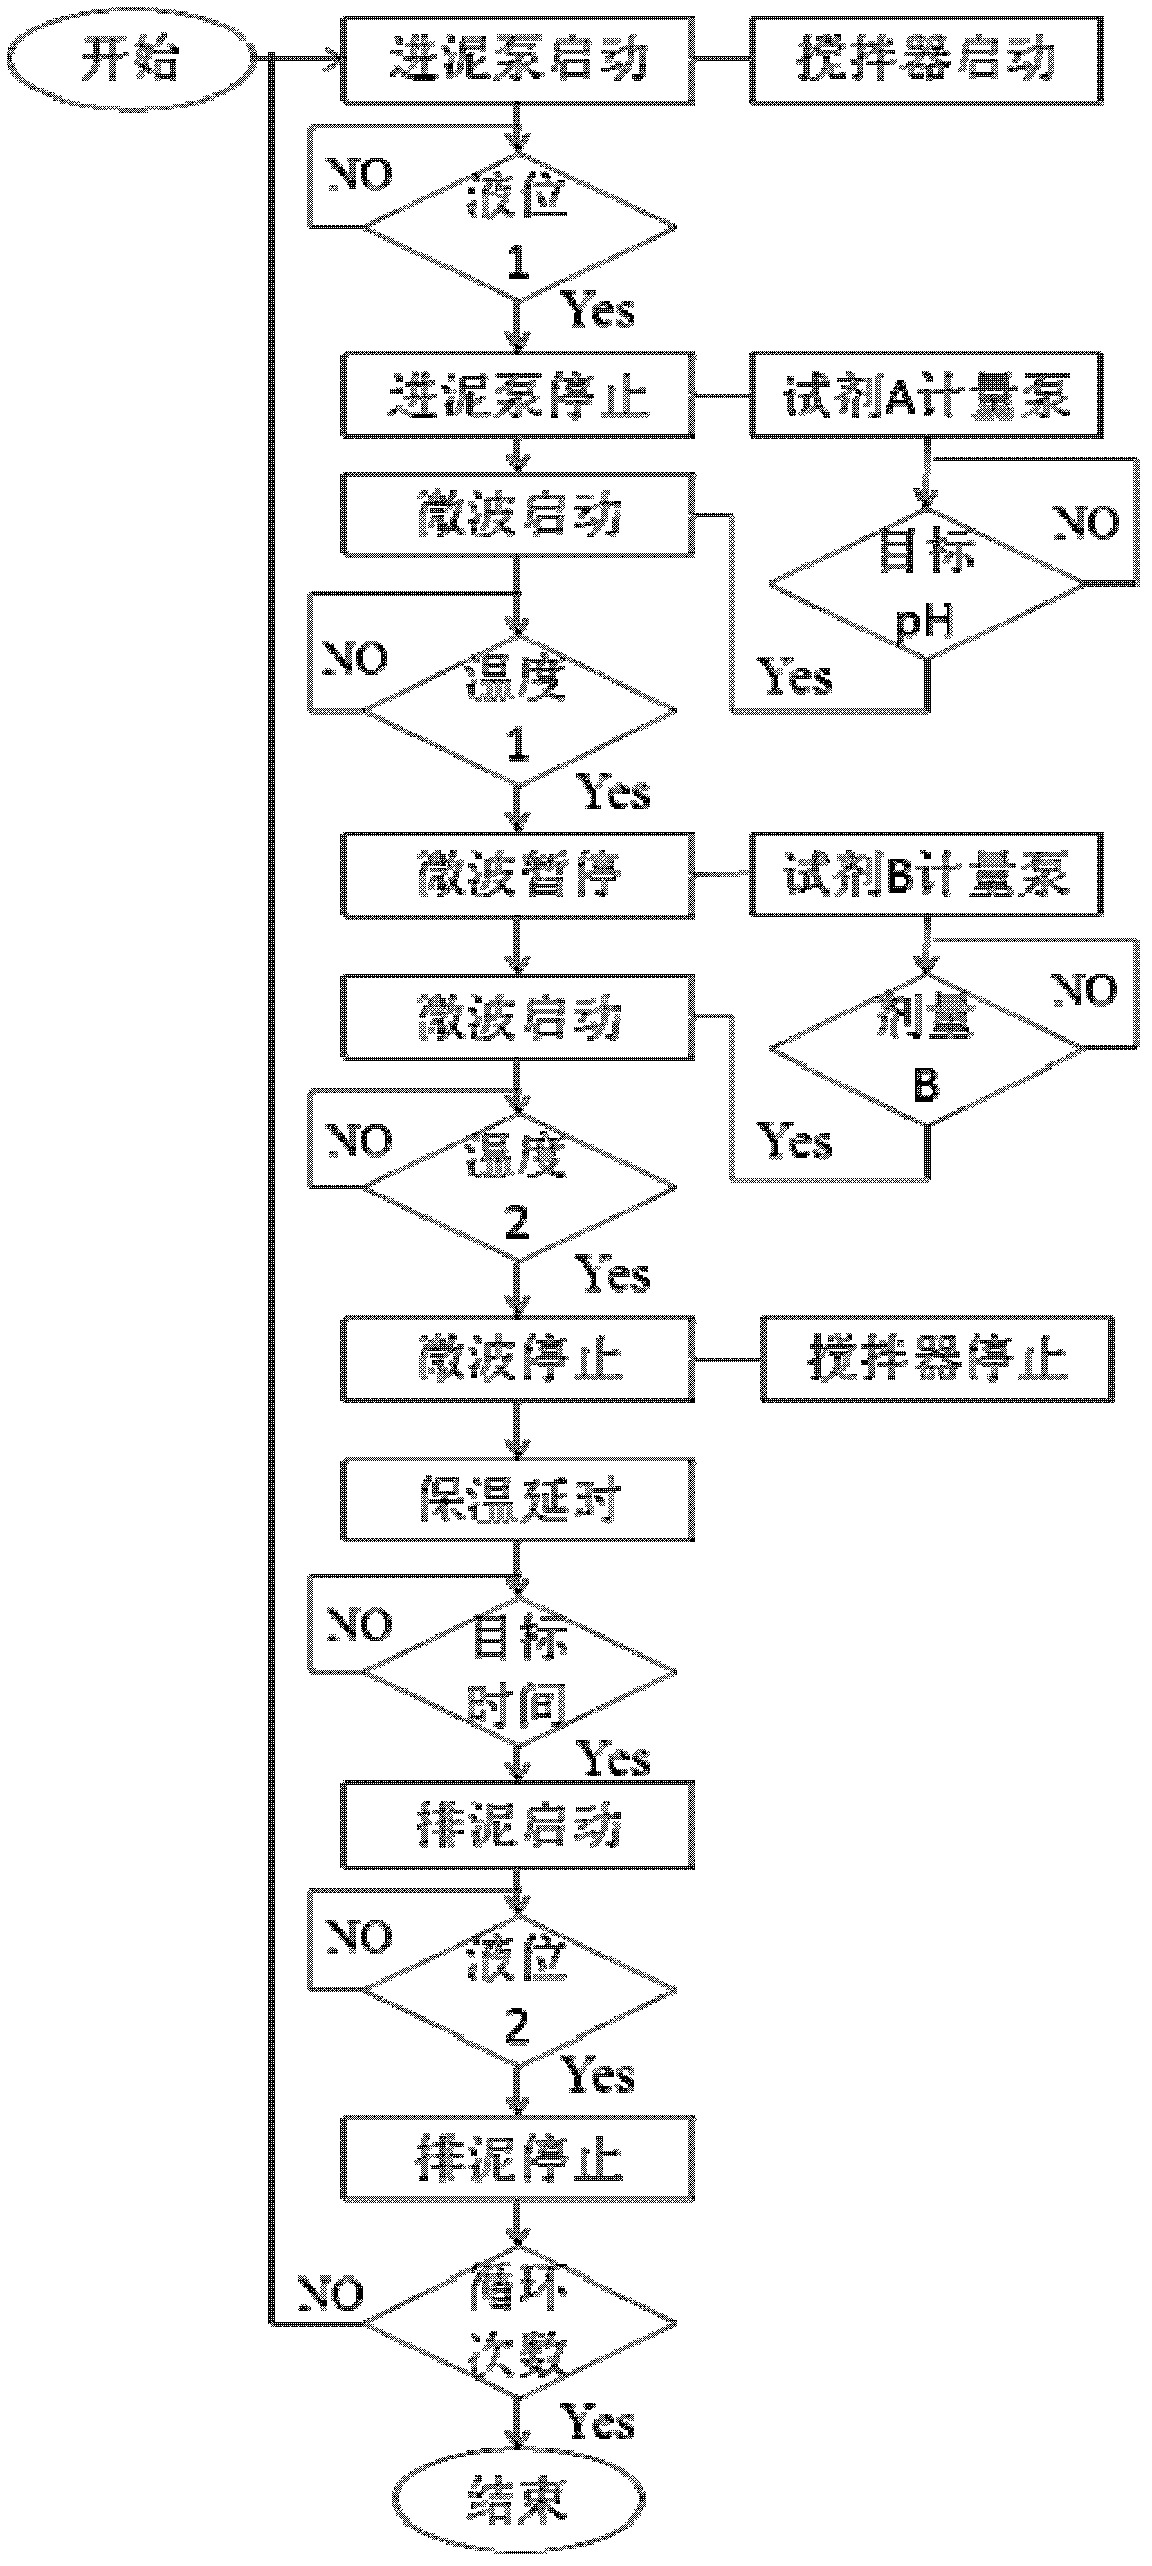 Method and apparatus for source sludge reduction based on microwave sludge pretreatment